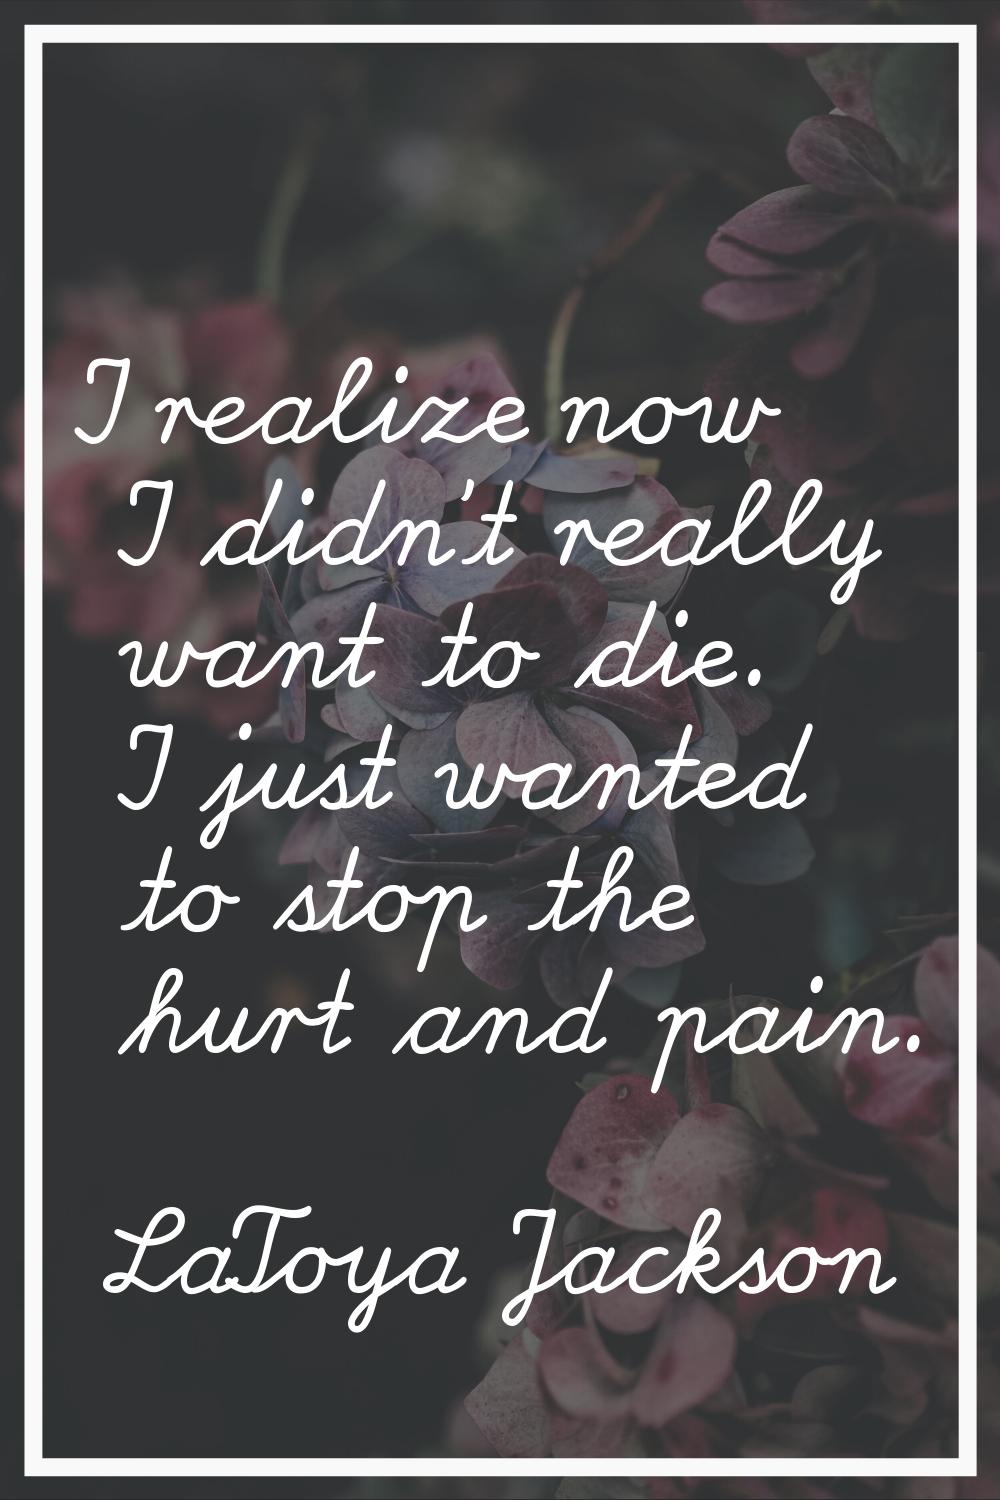 I realize now I didn't really want to die. I just wanted to stop the hurt and pain.